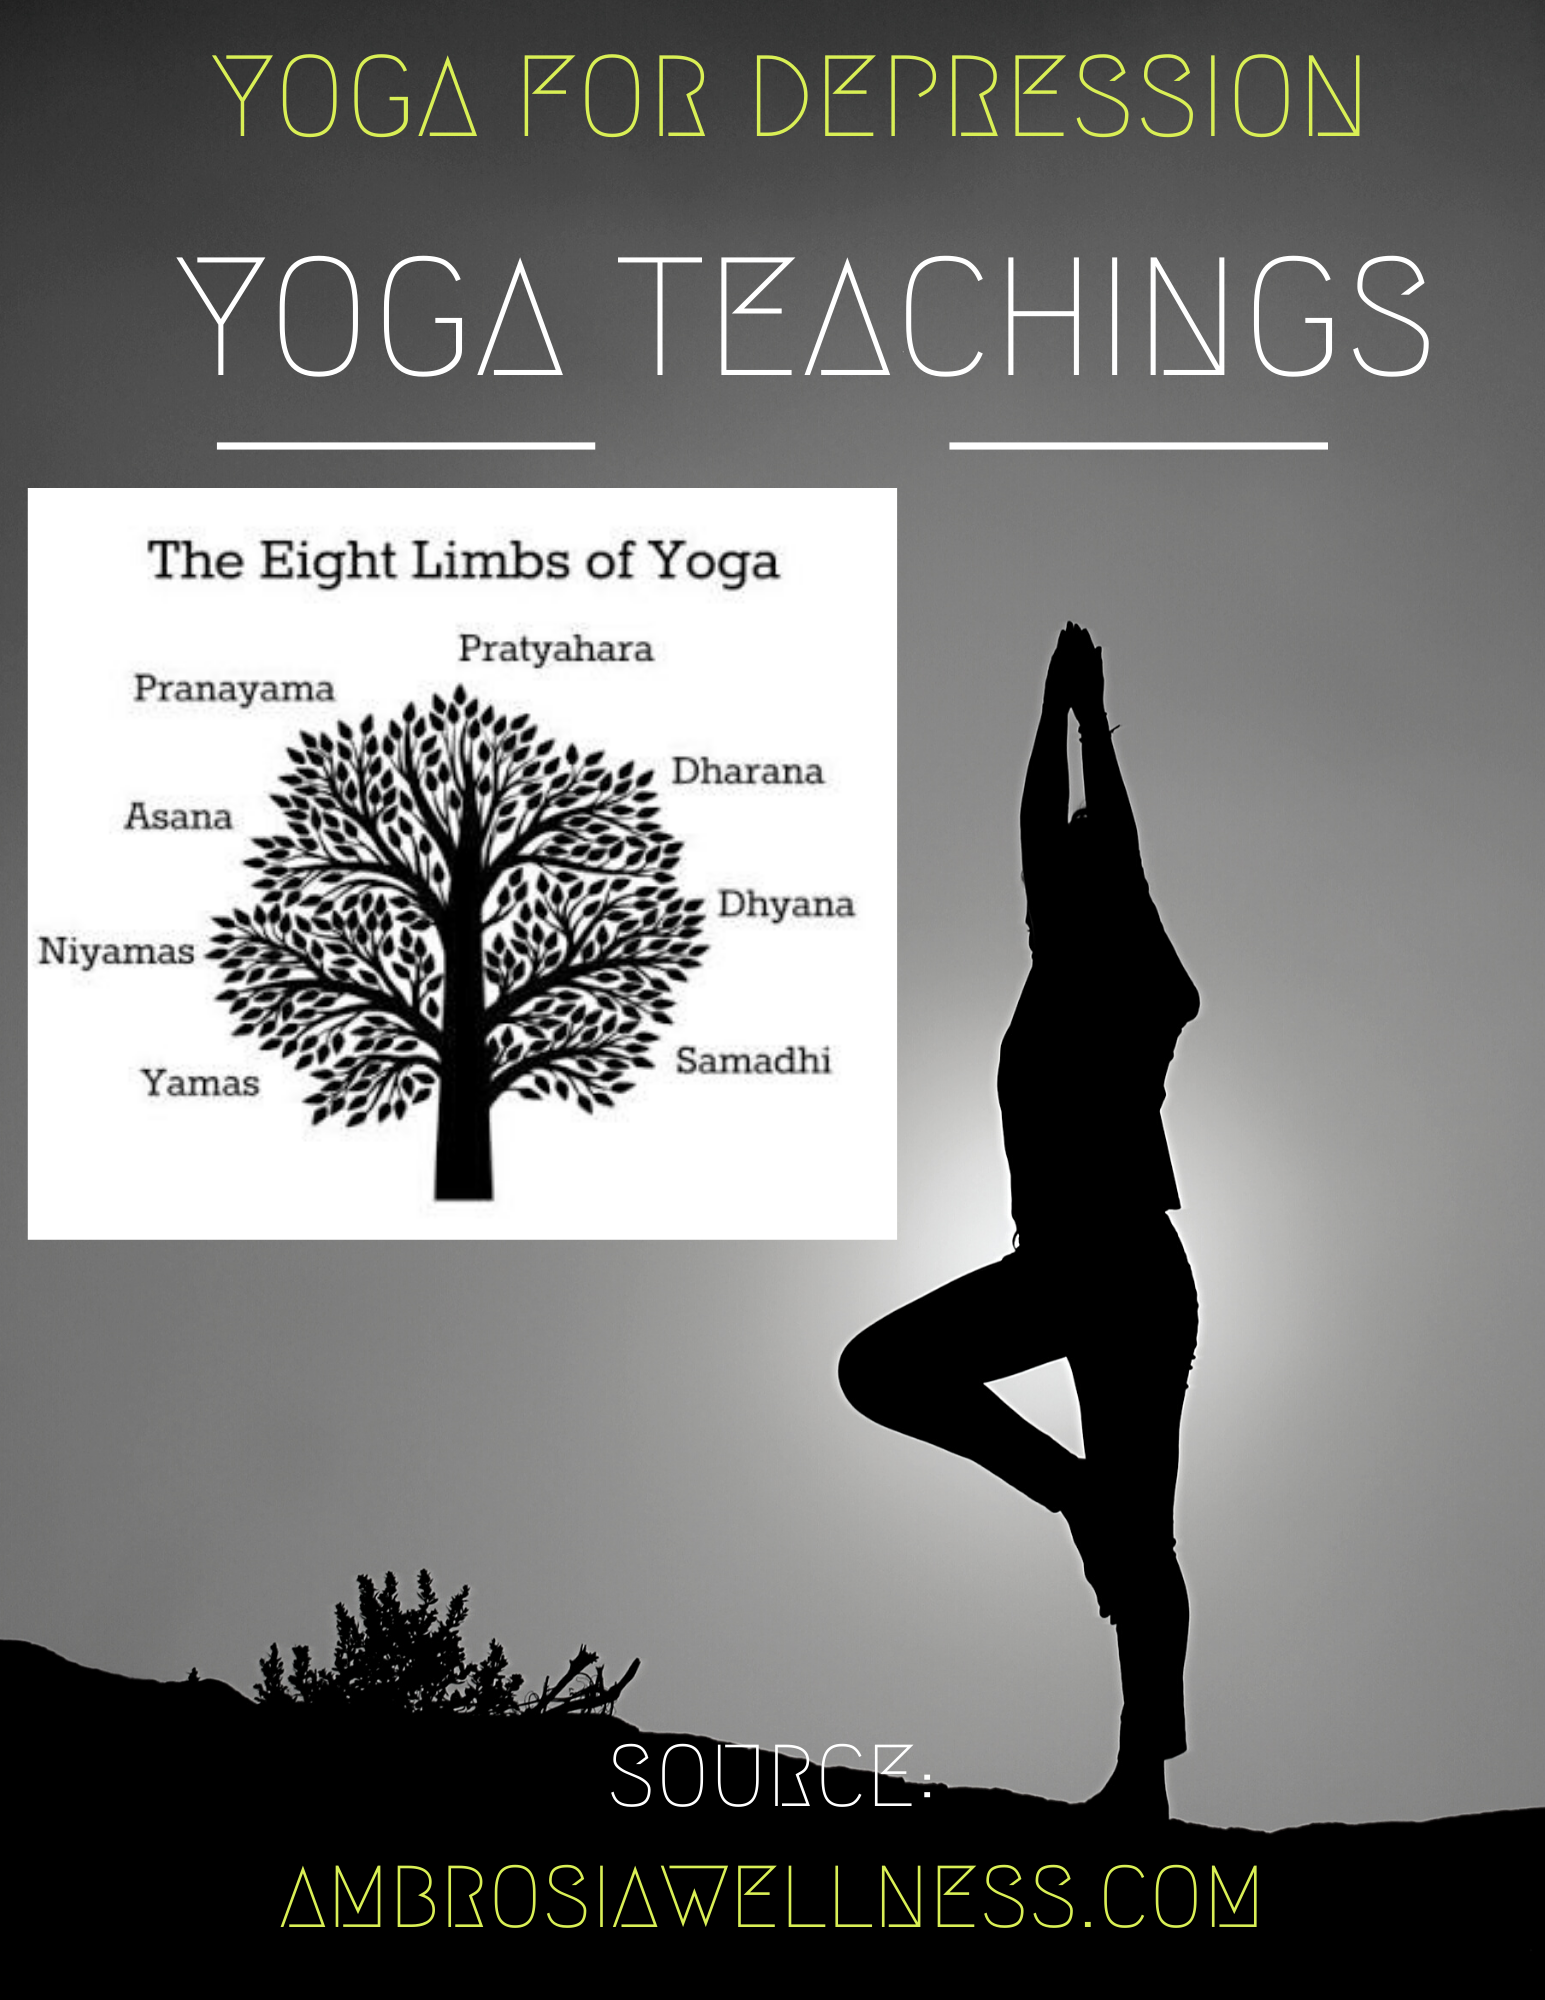 The Eight Limbs of Yoga | Gallery posted by Melanie | Lemon8